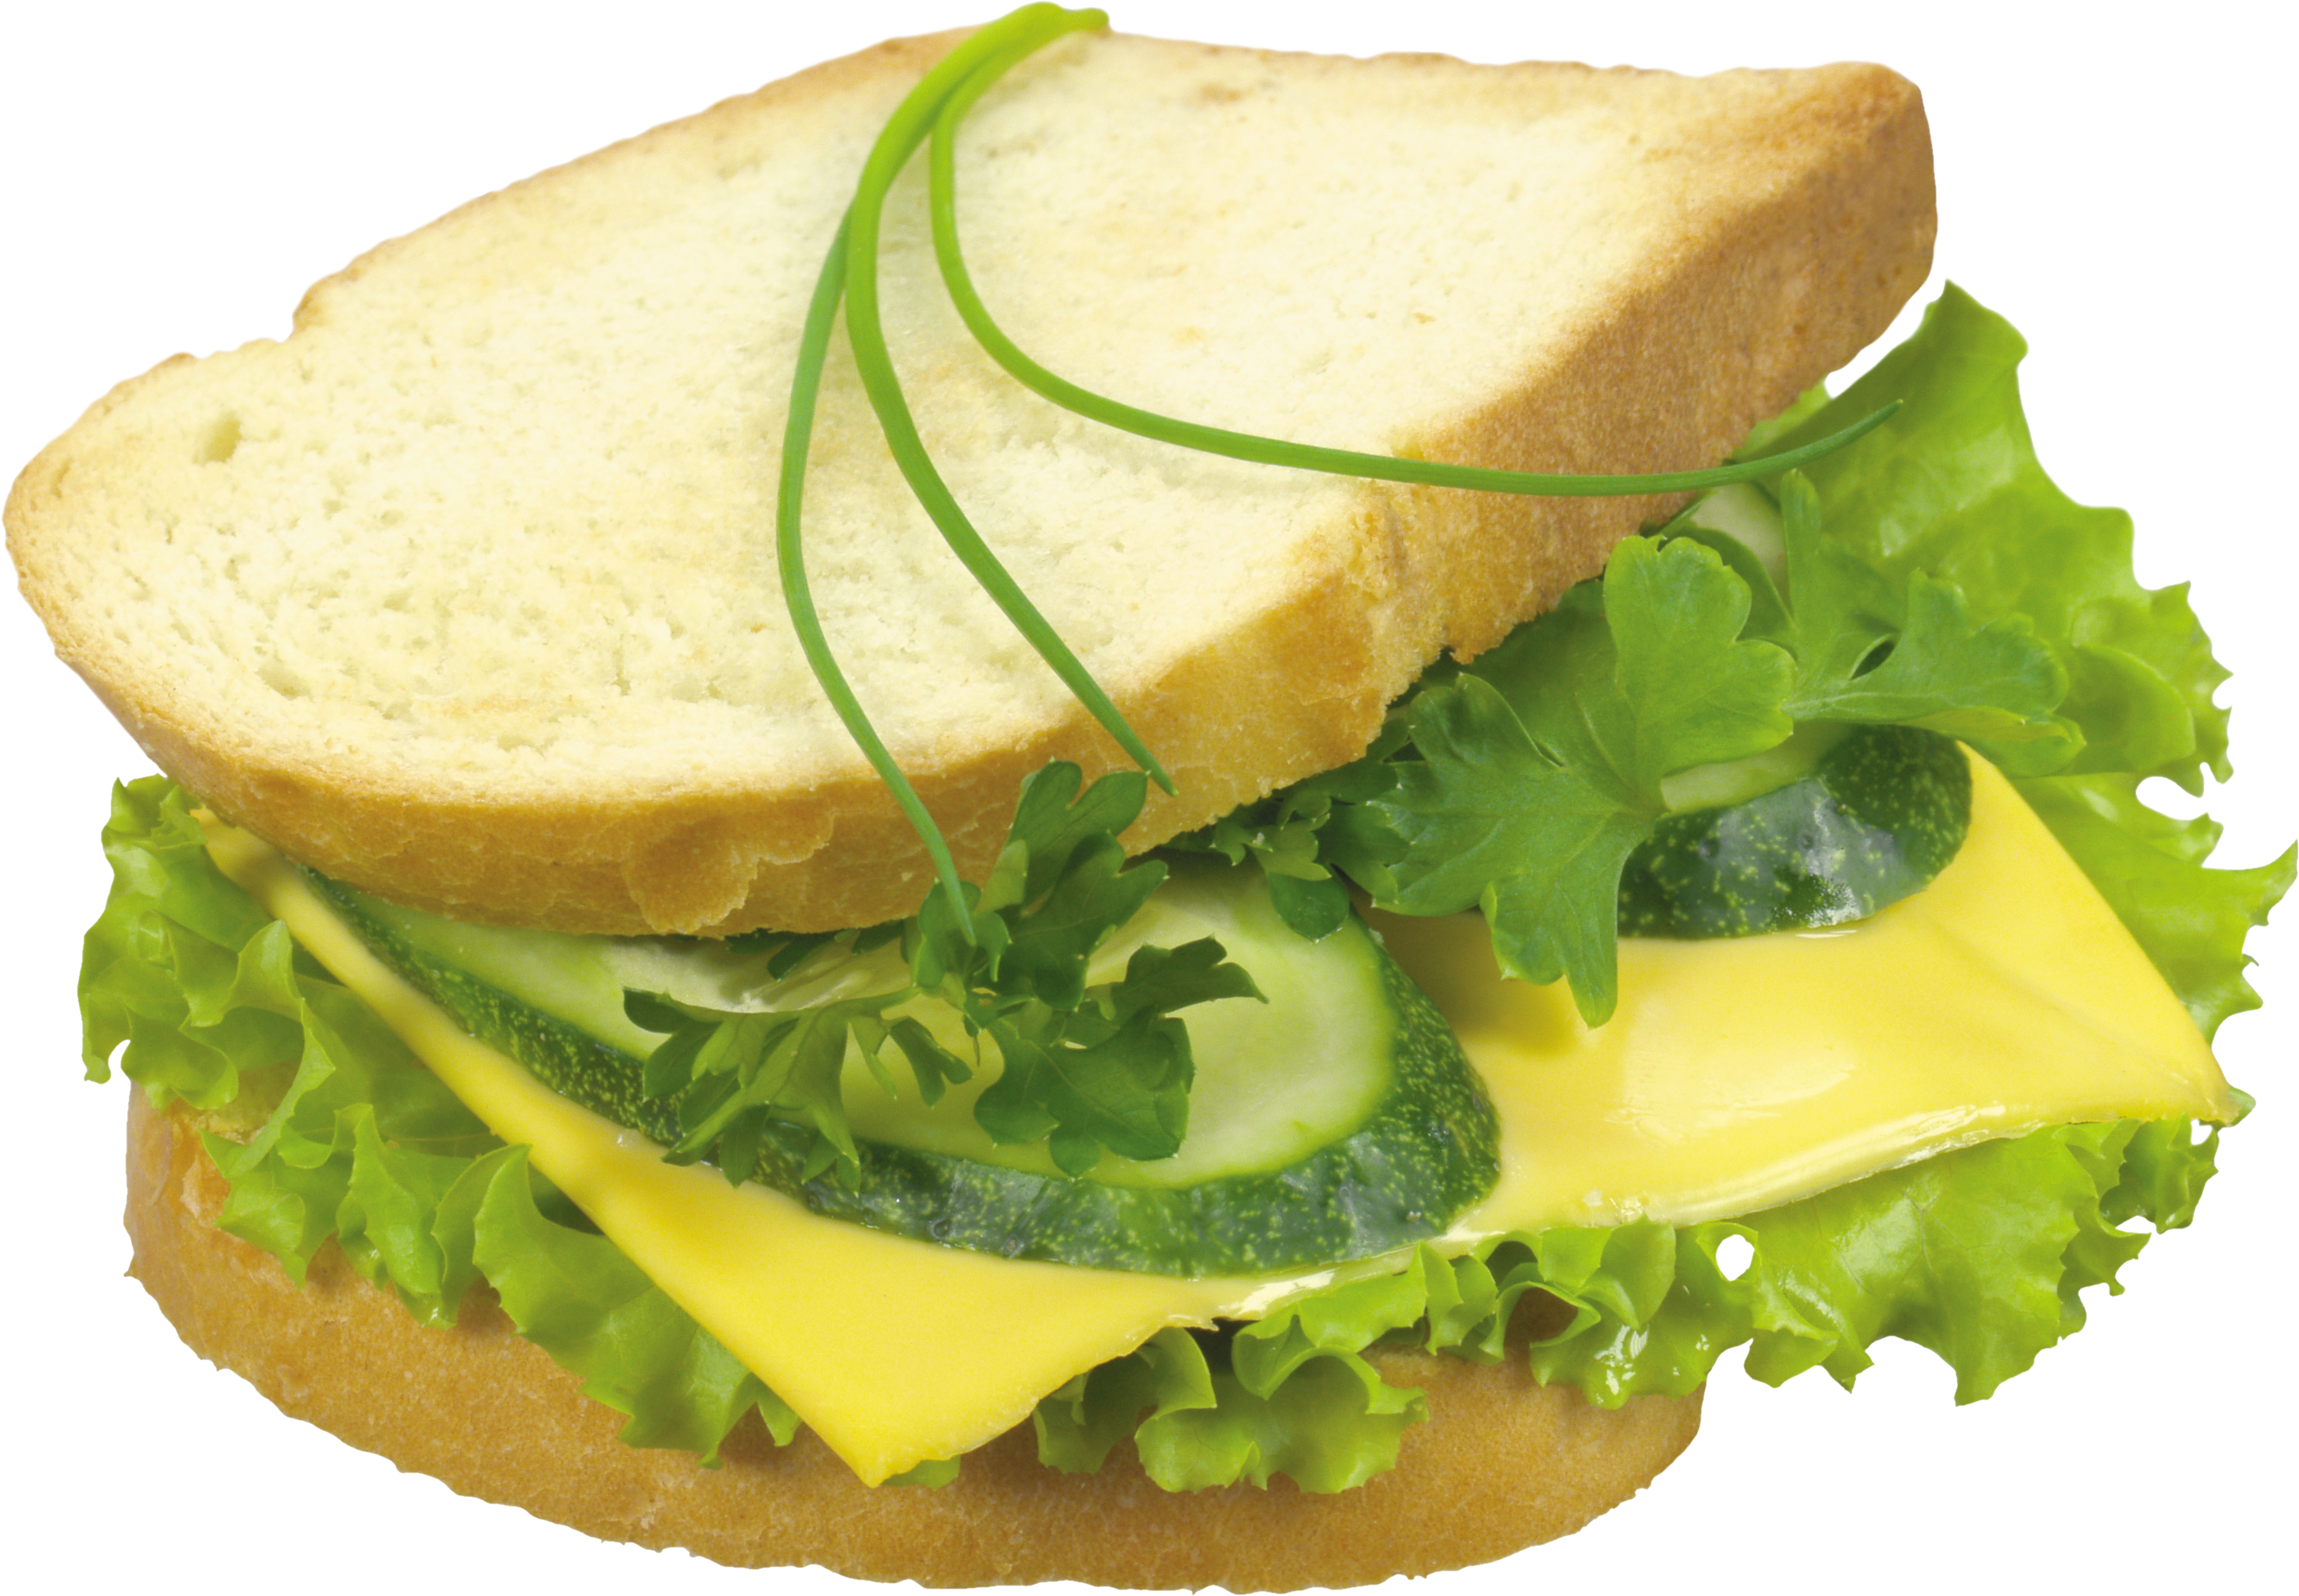 Burger and sandwich PNG images Download